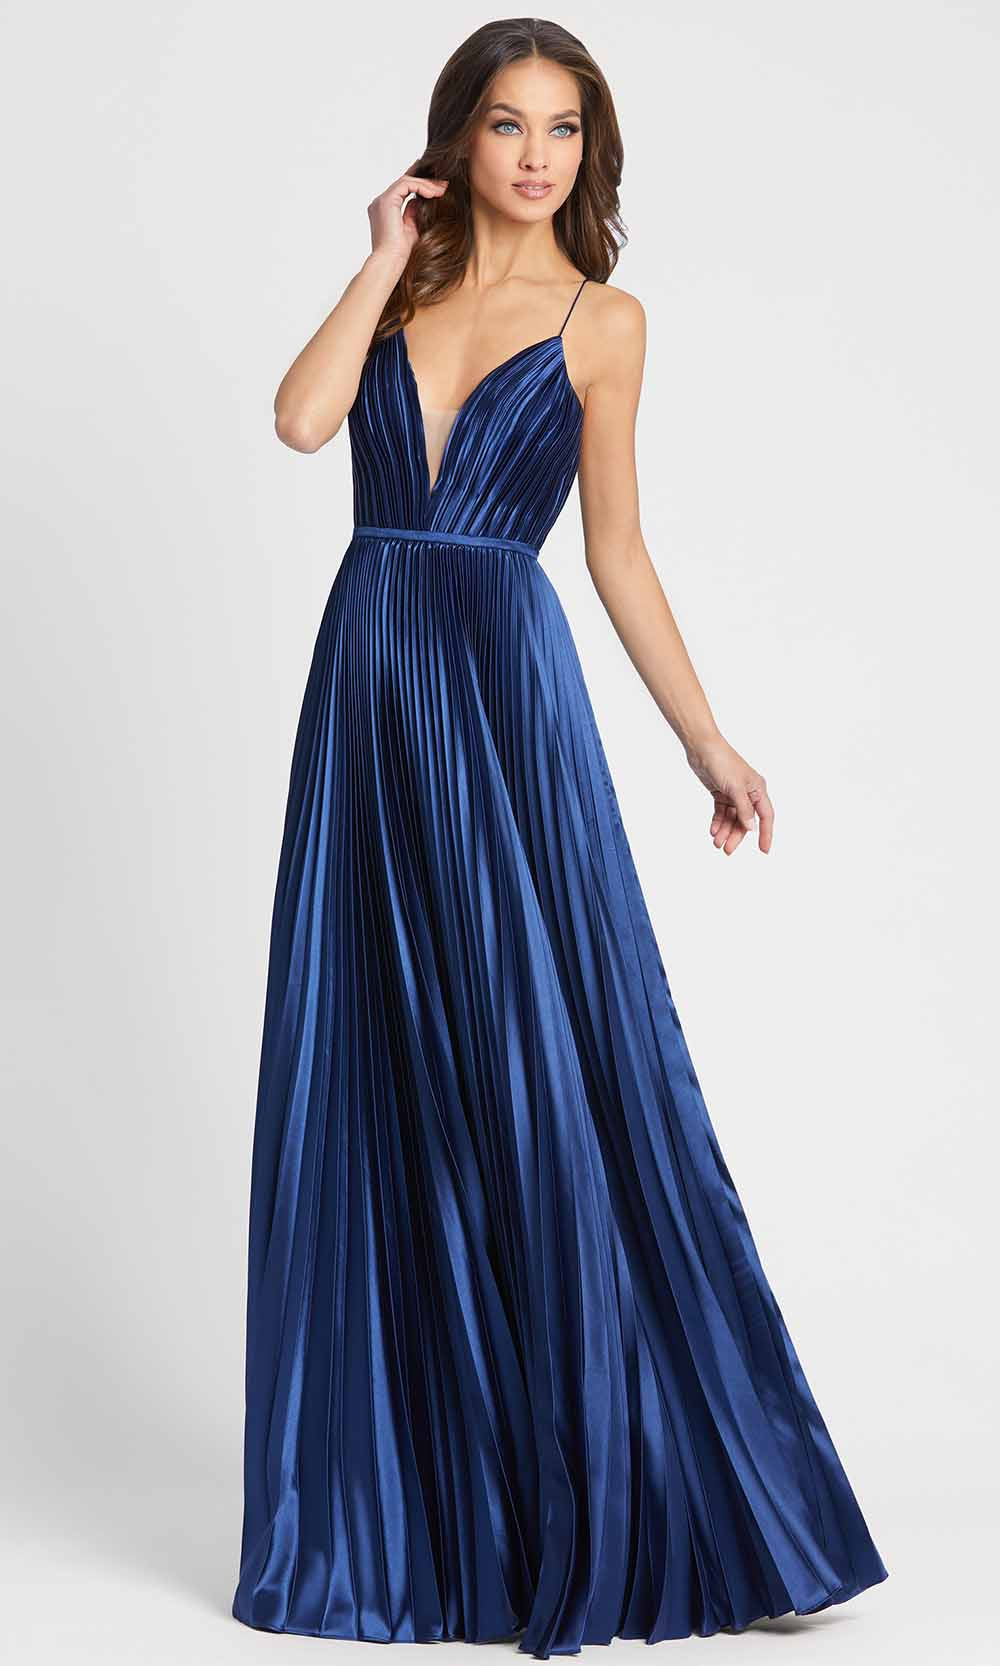 Ieena Duggal - 49039I Spaghetti Strap Deep V-Neck Pleated A-Line Gown in Blue 